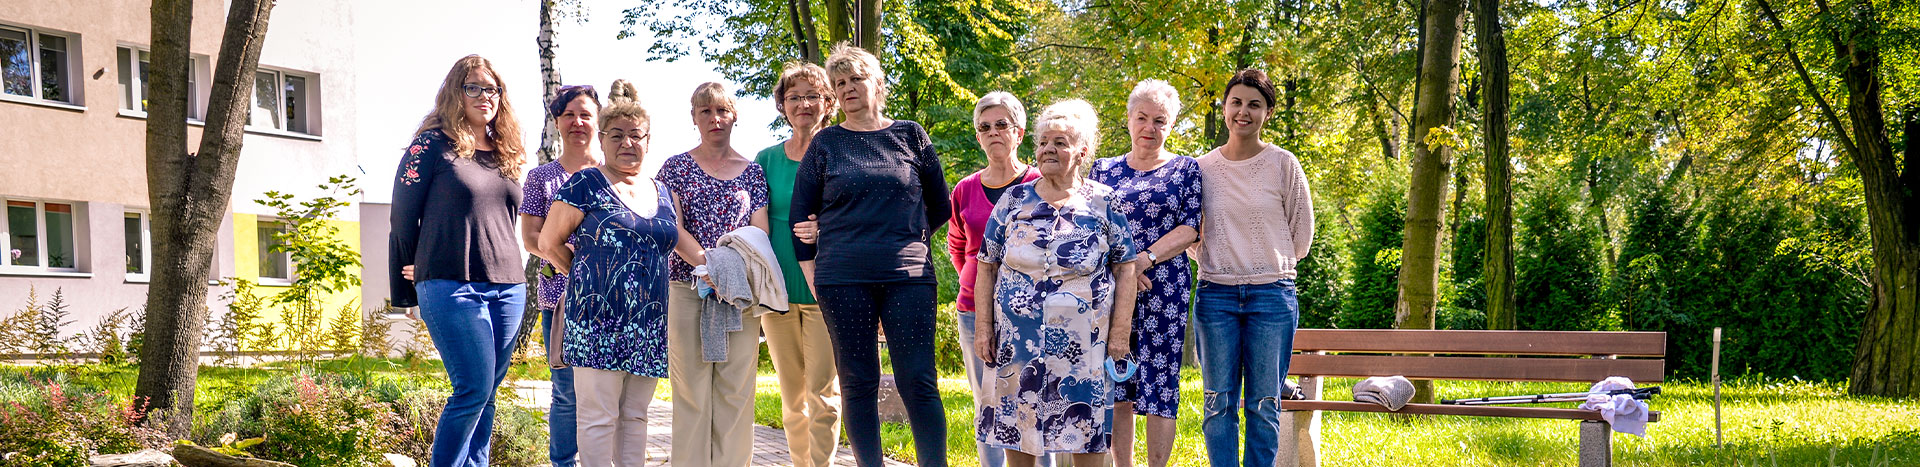 The photograph shows a group of women - seniors with their carers, standing by the pond. You can see a bench nearby and a tree and building in the background. The photo was taken by Dominik Wójcik.